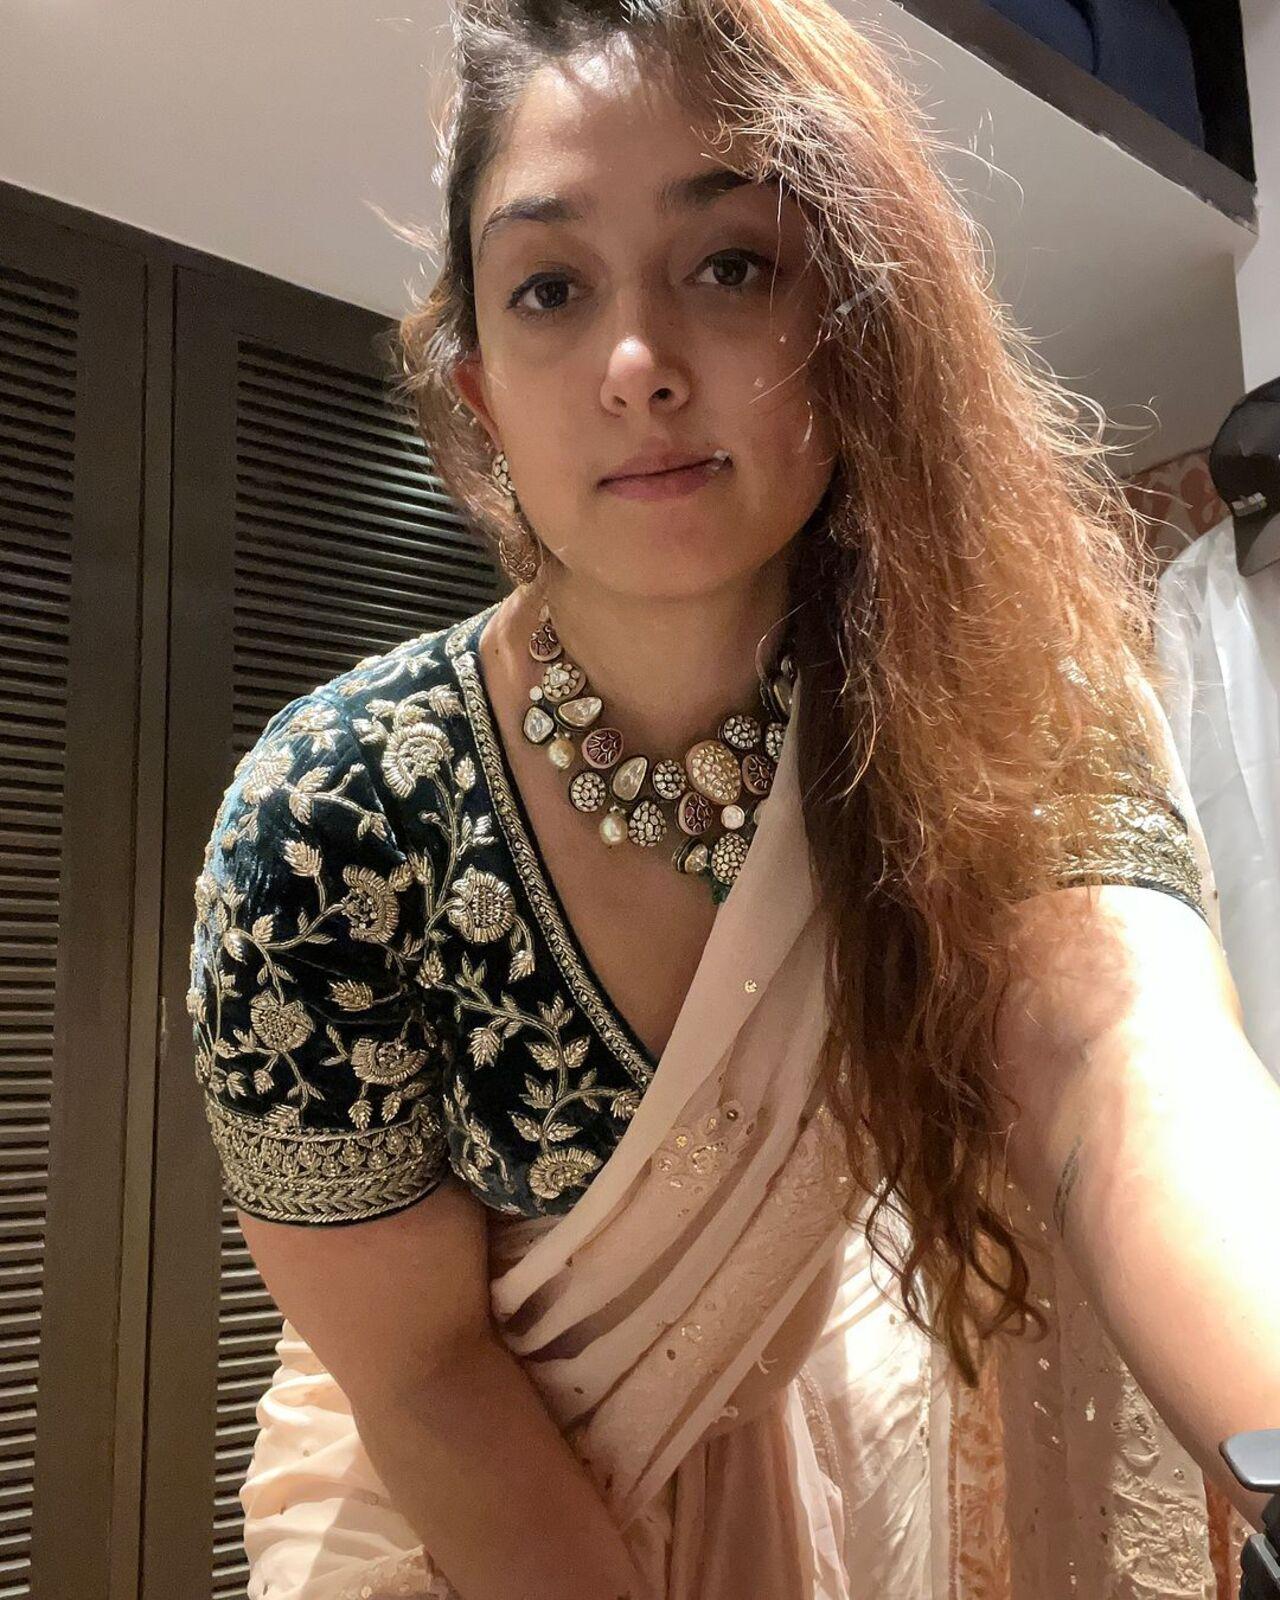 Aamir Khan's daughter Ira Khan shared pictures of her look for the party on her Instagram feed